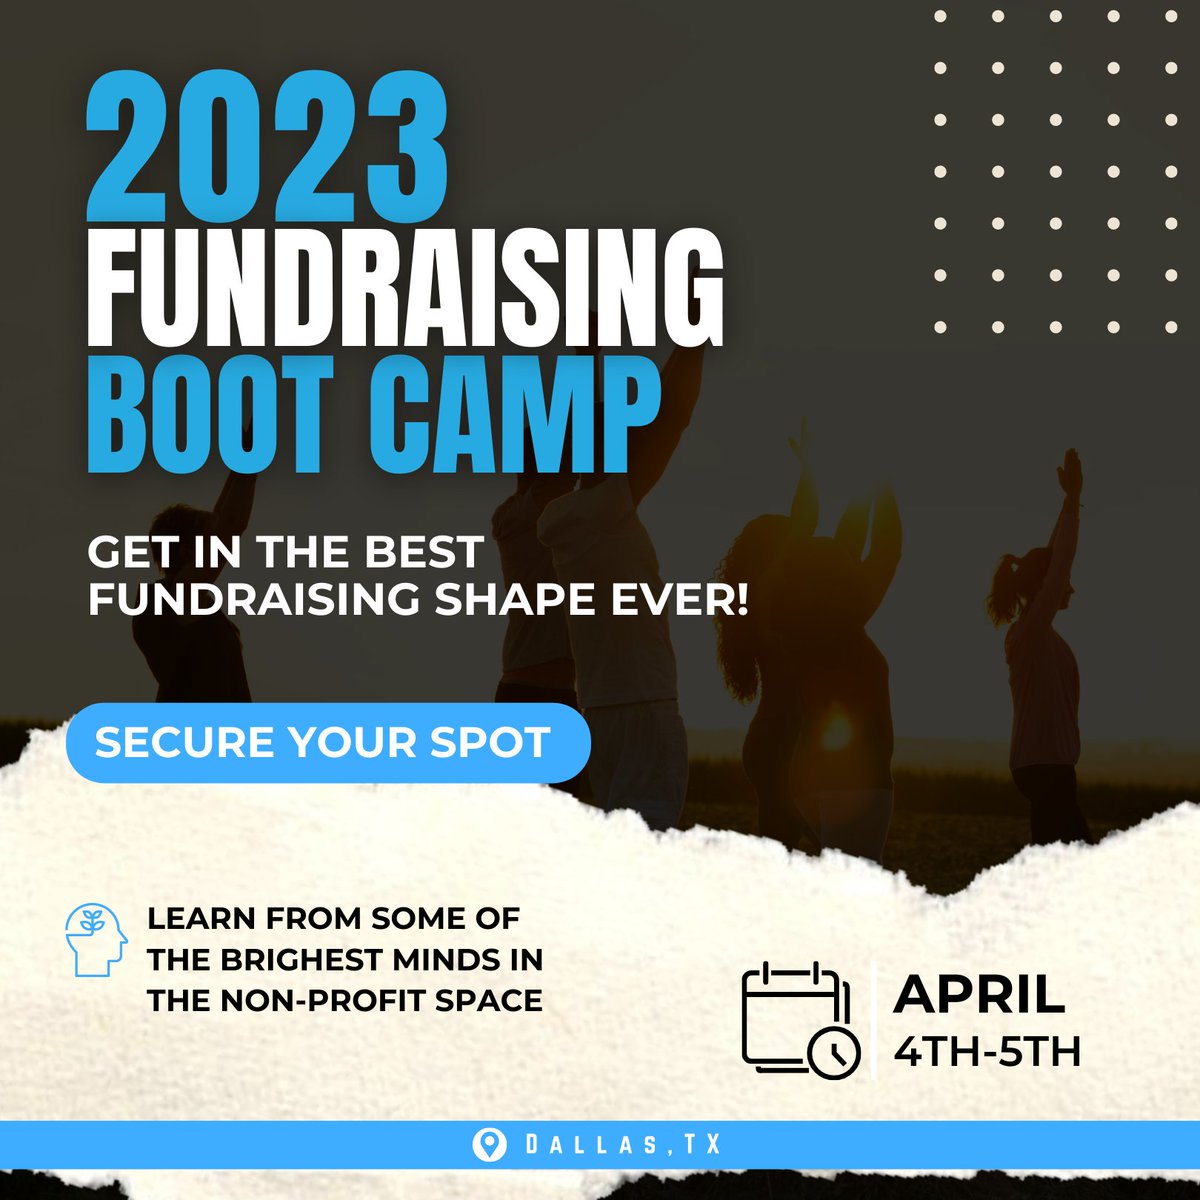 Are you a non-profit professional? Come join us for our 2-day in-person Fundraising Boot Camp and learn how to raise more money - the HGA way! Register and learn more here: pages.insightly.services/hgafundraising…

#fundraising #bootcamp #nonprofitleader #nonprofit #raisemoremoney #thehgaway